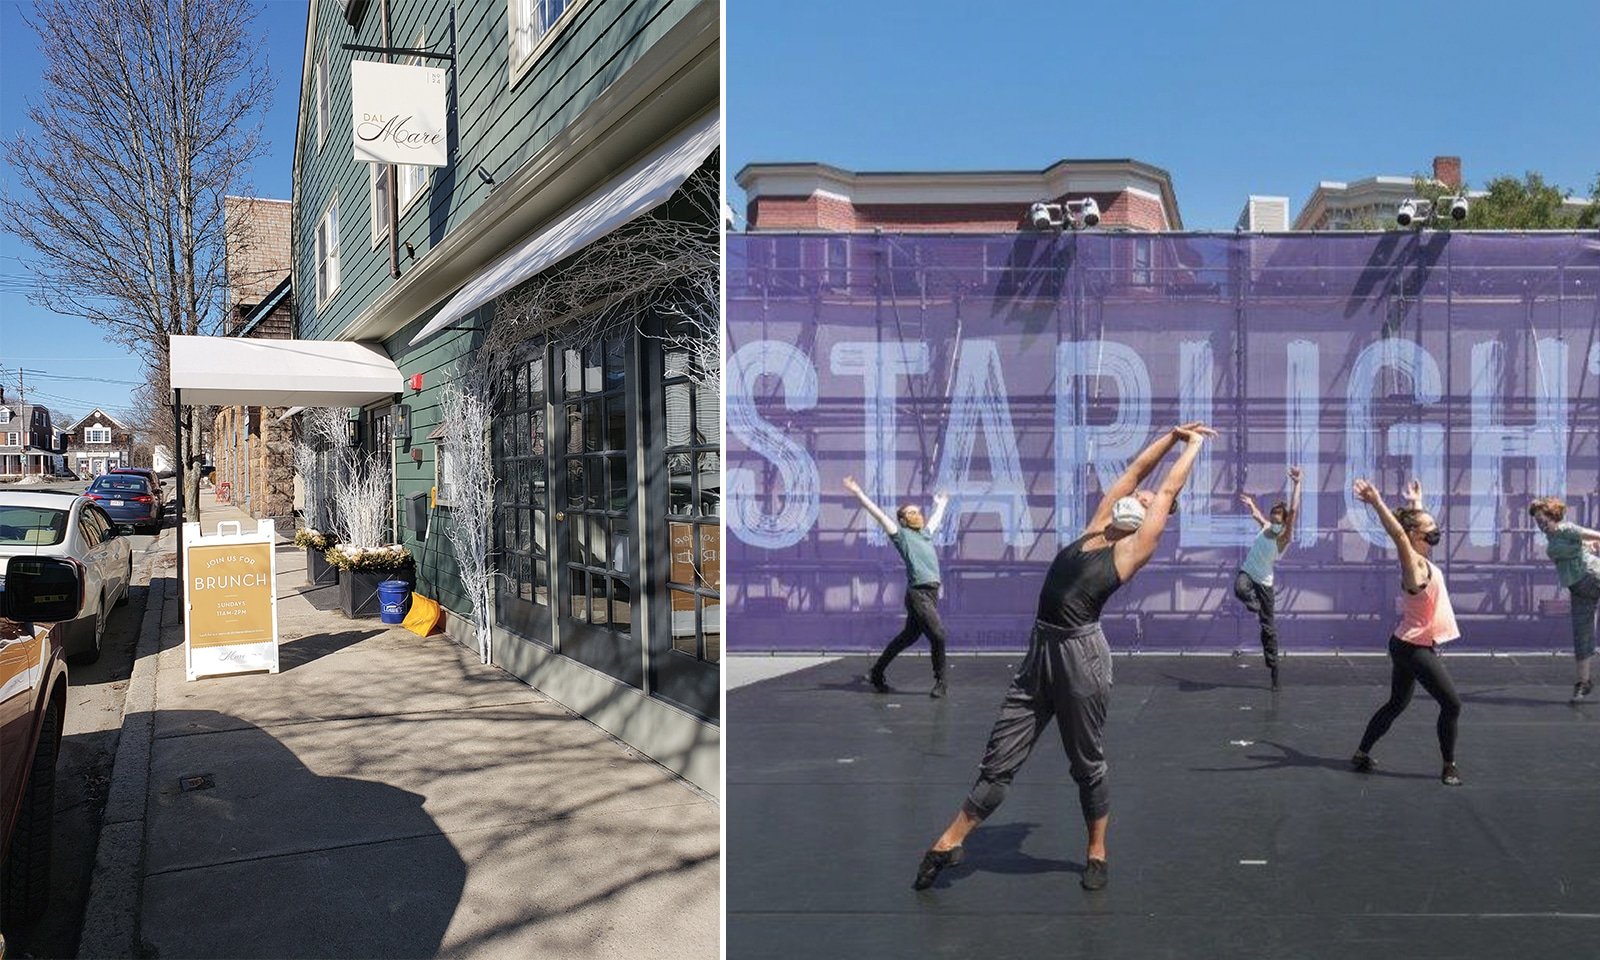 Massachusetts storefronts and an outdoor yoga class